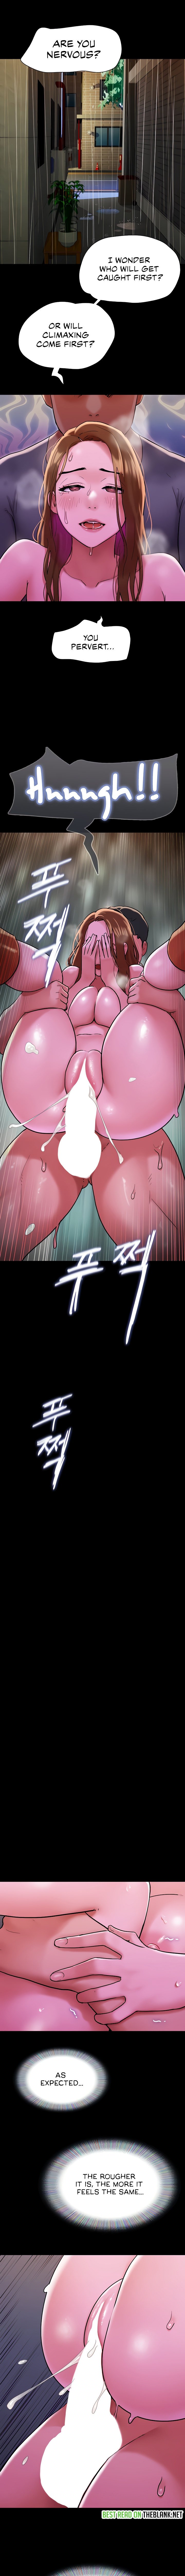 not-to-be-missed-chap-31-8